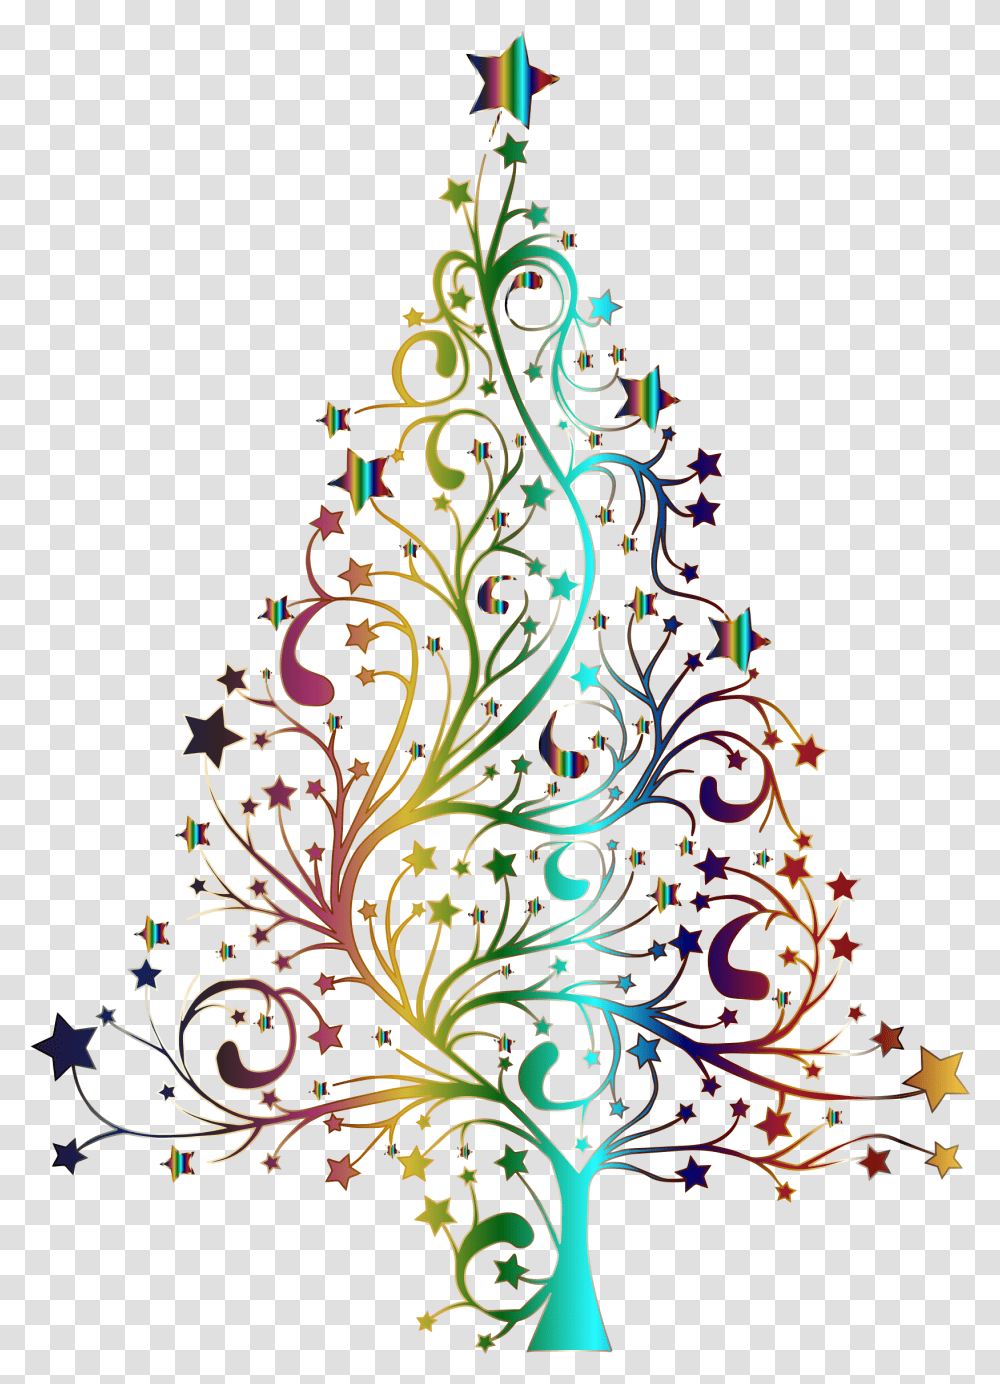 Christmas Tree Clip Art Christmas Tree Black And White, Graphics, Floral Design, Pattern, Ornament Transparent Png